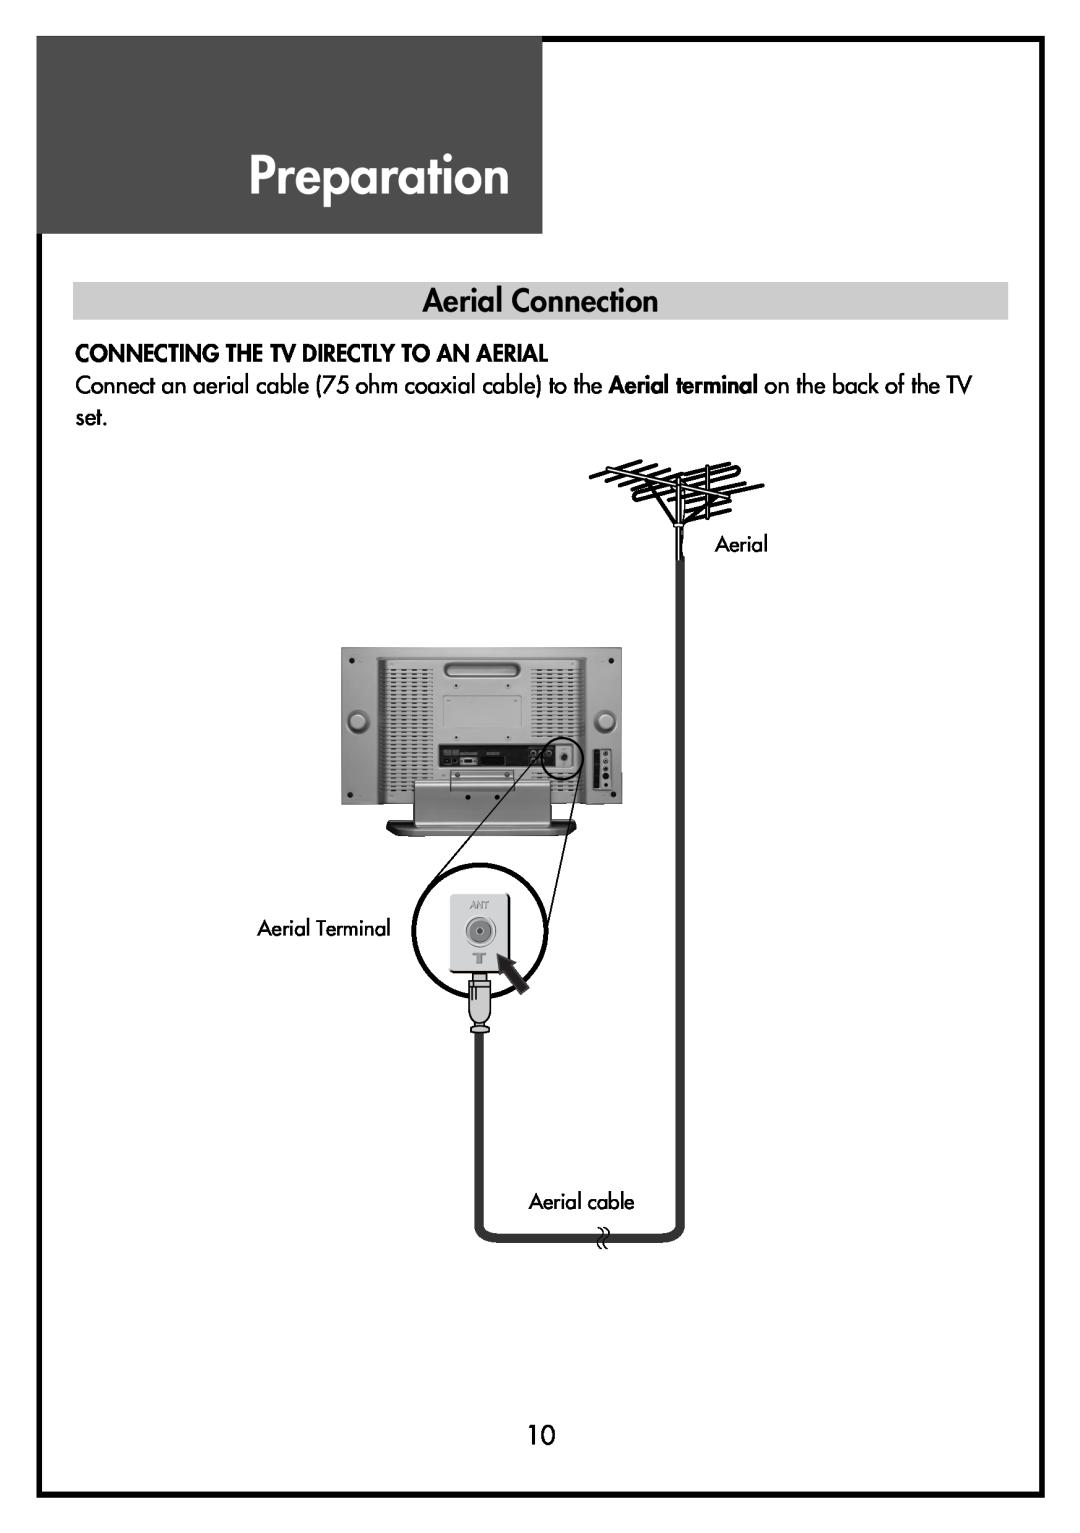 Daewoo DSL-15D3, DSL-15D4, DSL-17D3, DSL-17D4 Aerial Connection, Preparation, Connecting The Tv Directly To An Aerial 